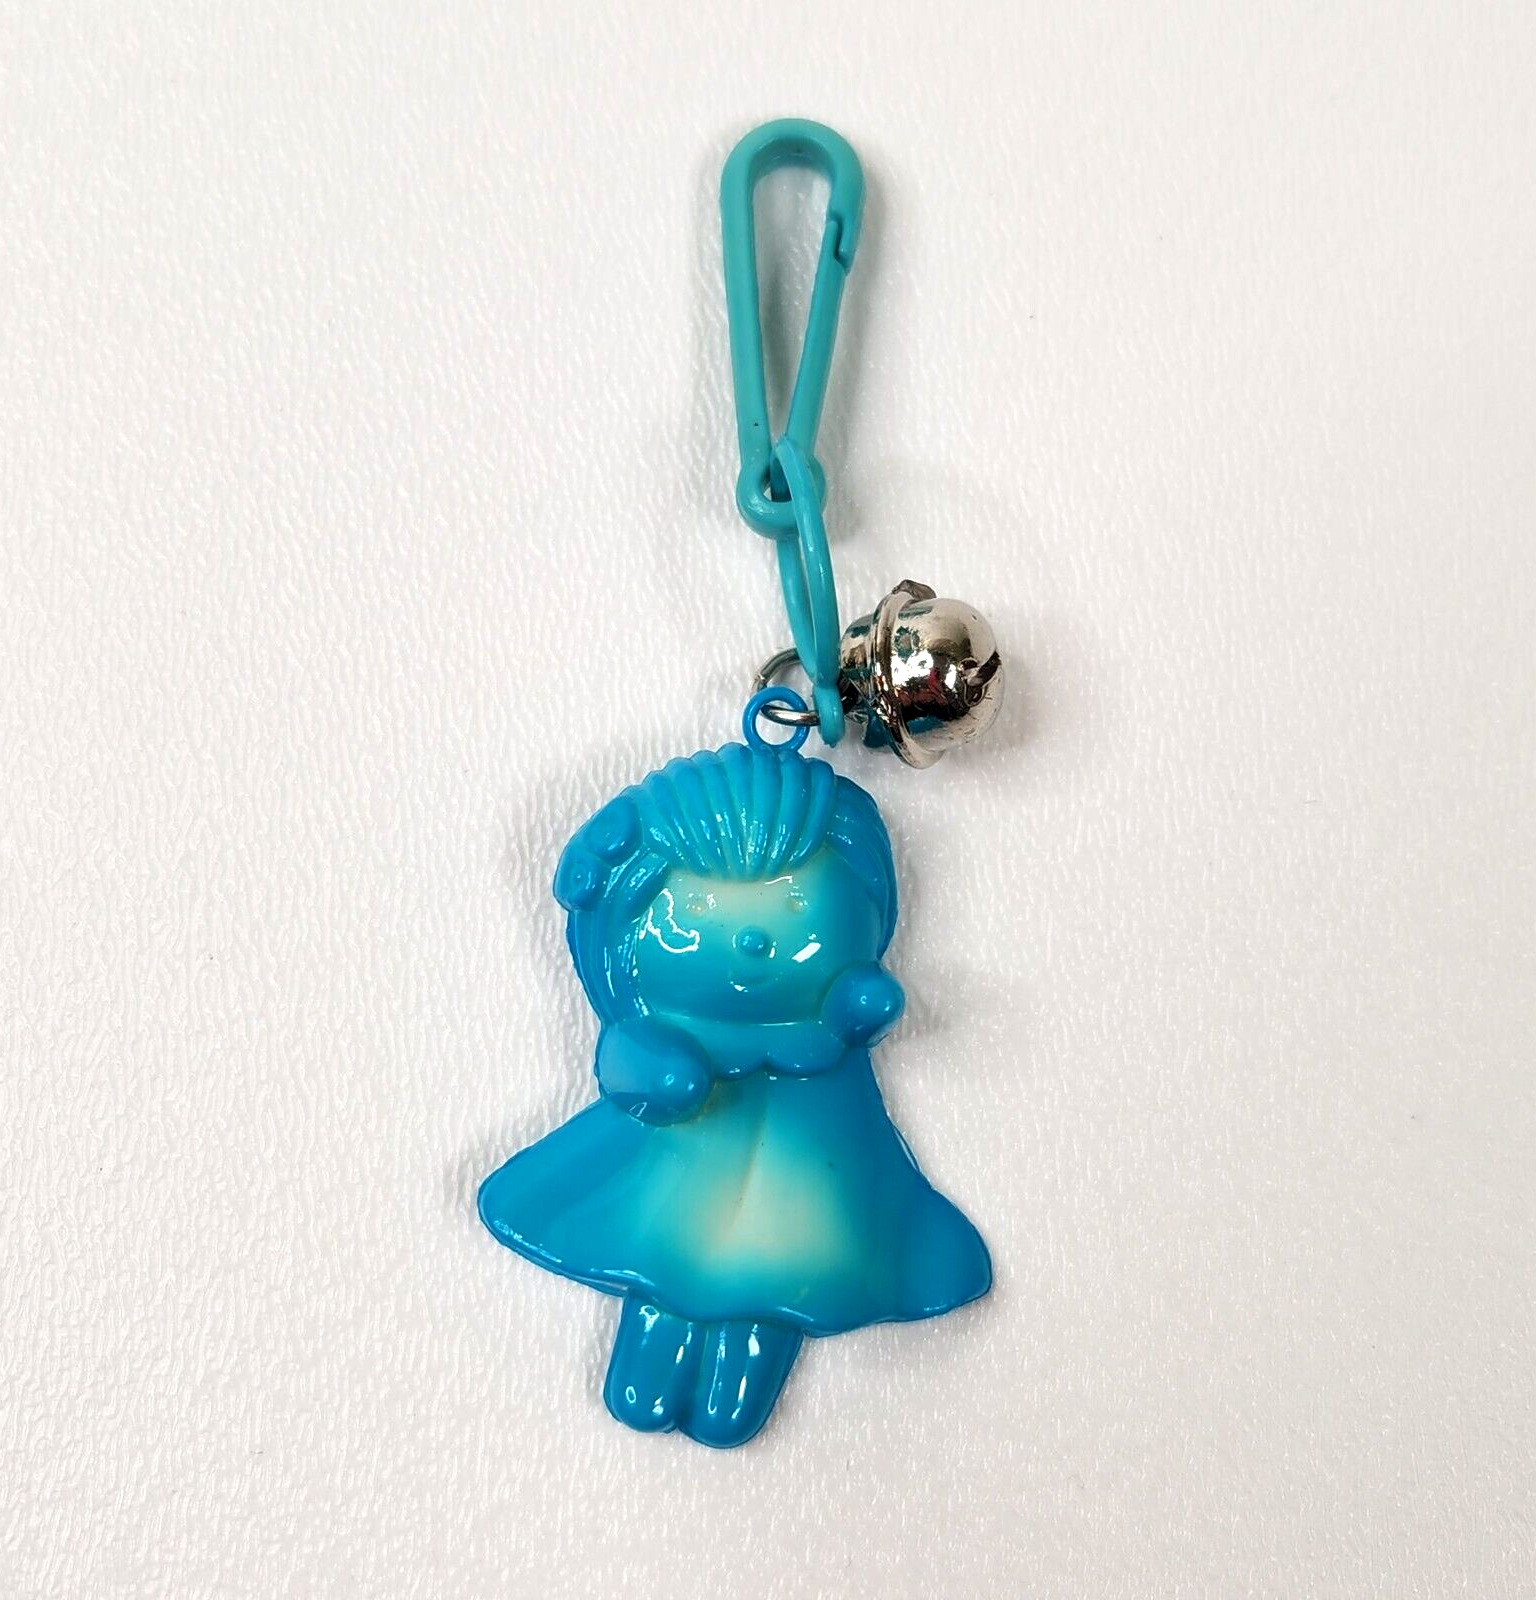 Vintage 1980s Plastic Bell Charm Rag Doll Toy For 80s Necklace